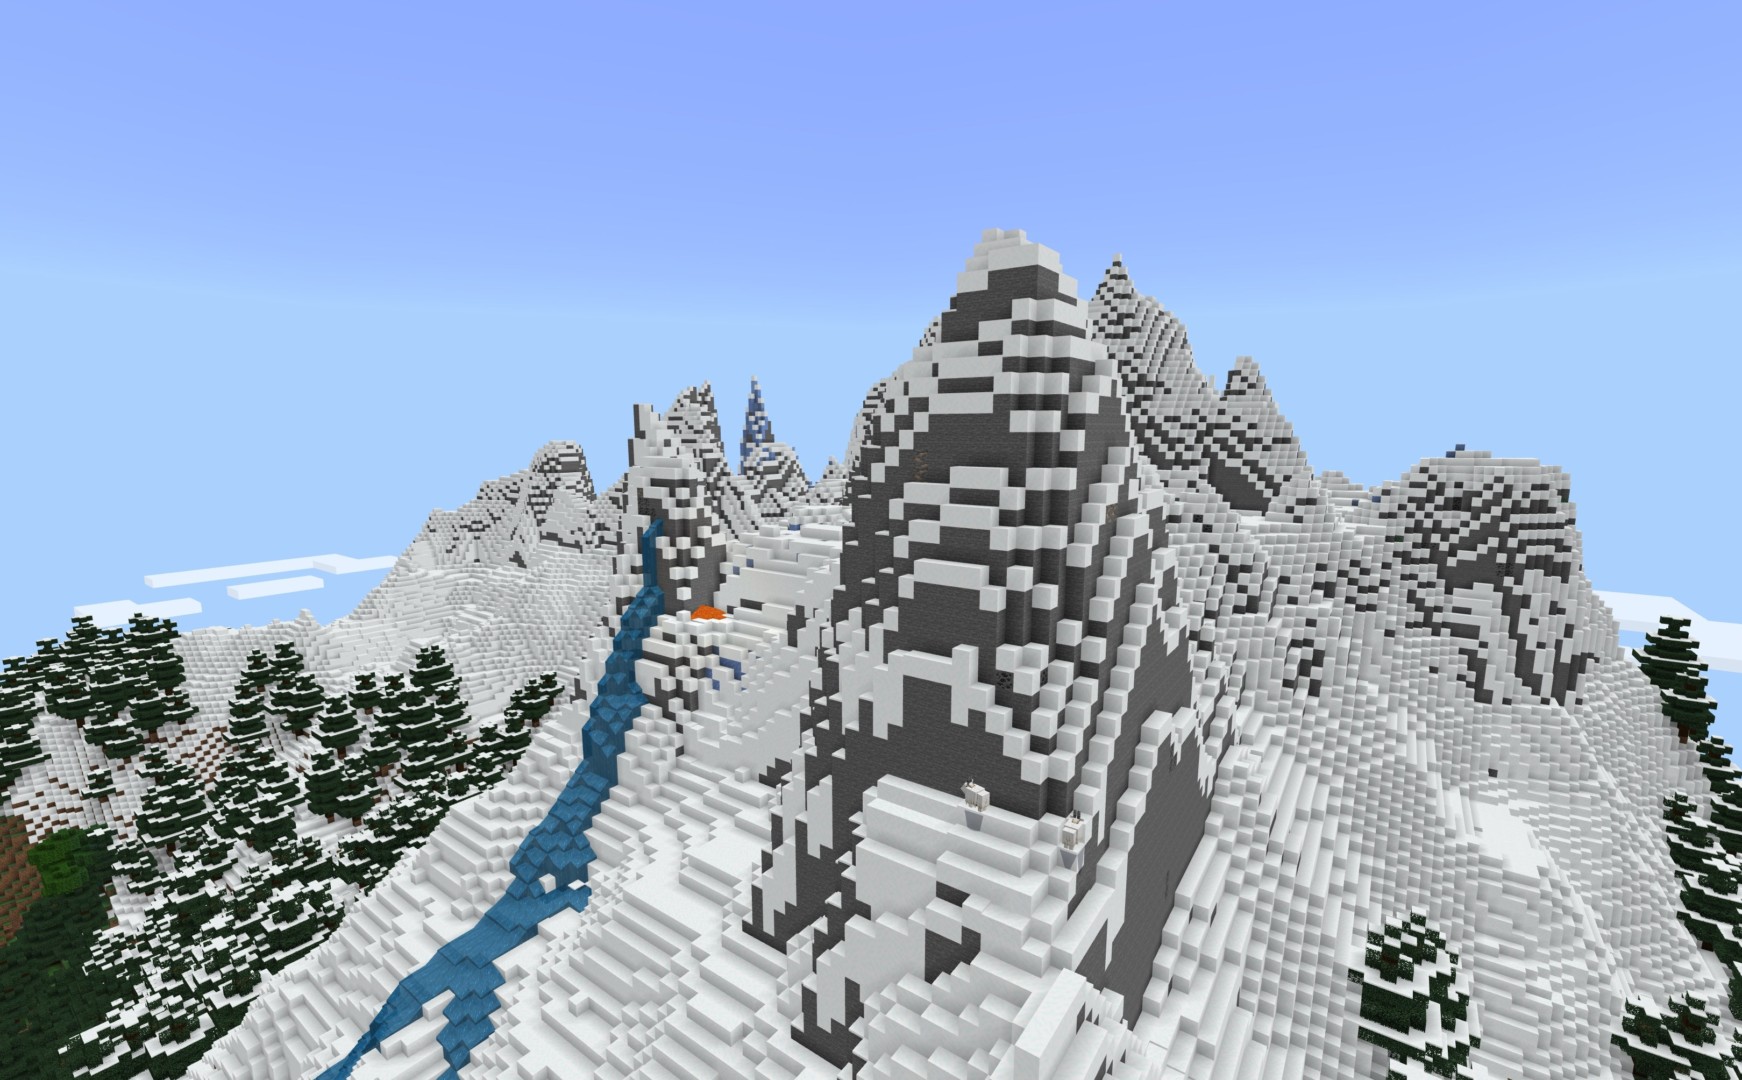 Minecraft mountain generation gets a boost with new biomes